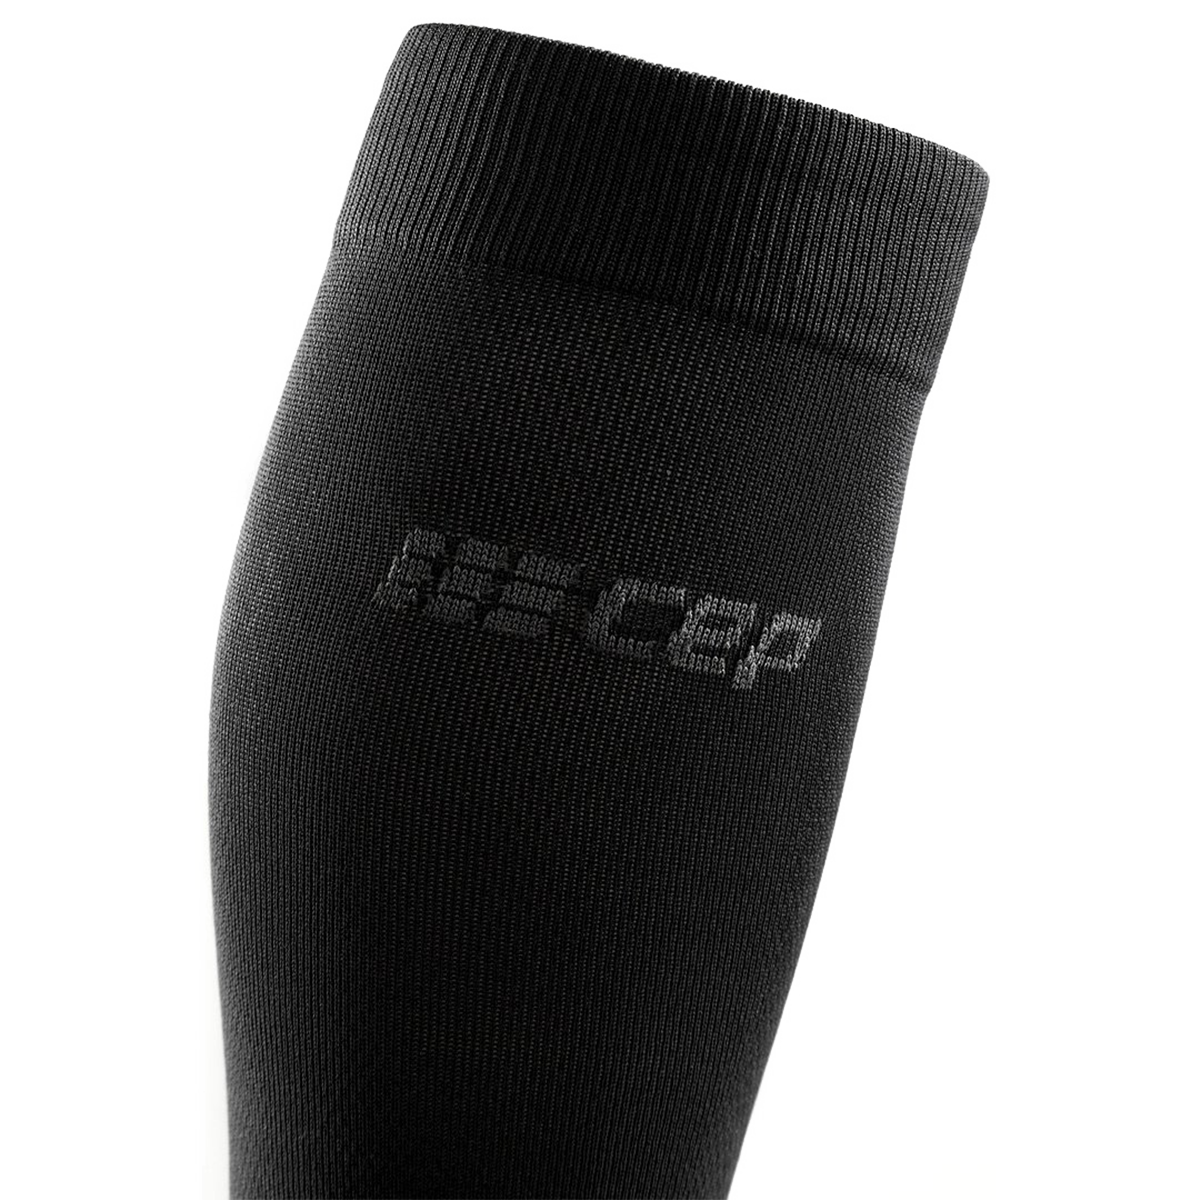 CEP Allday Compression Socks, , large image number null